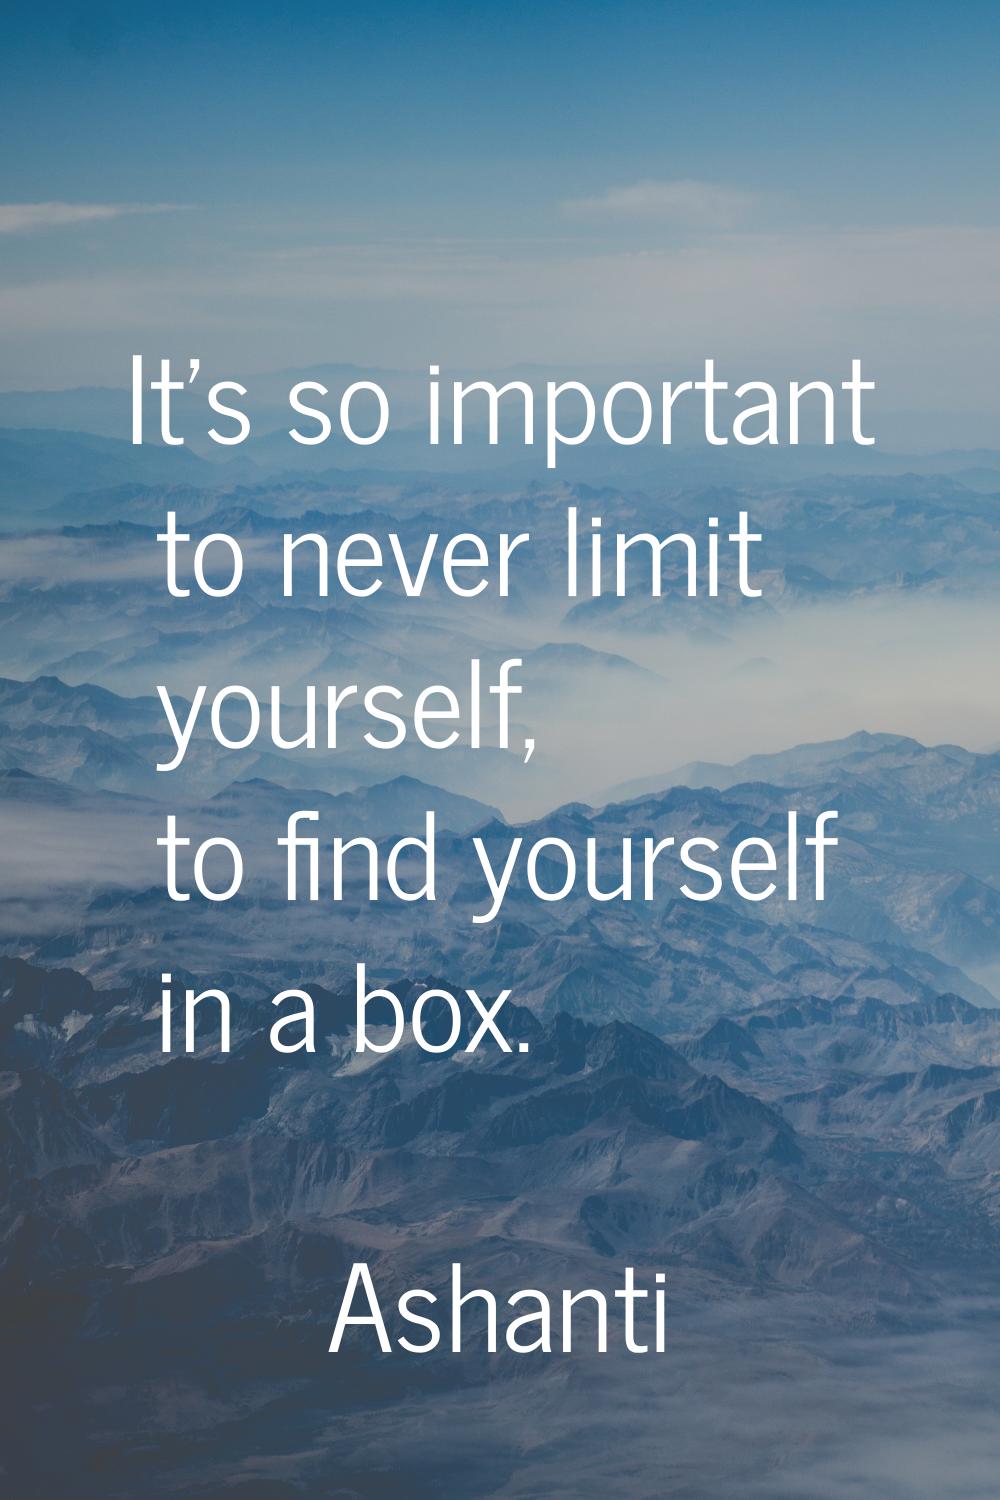 It's so important to never limit yourself, to find yourself in a box.